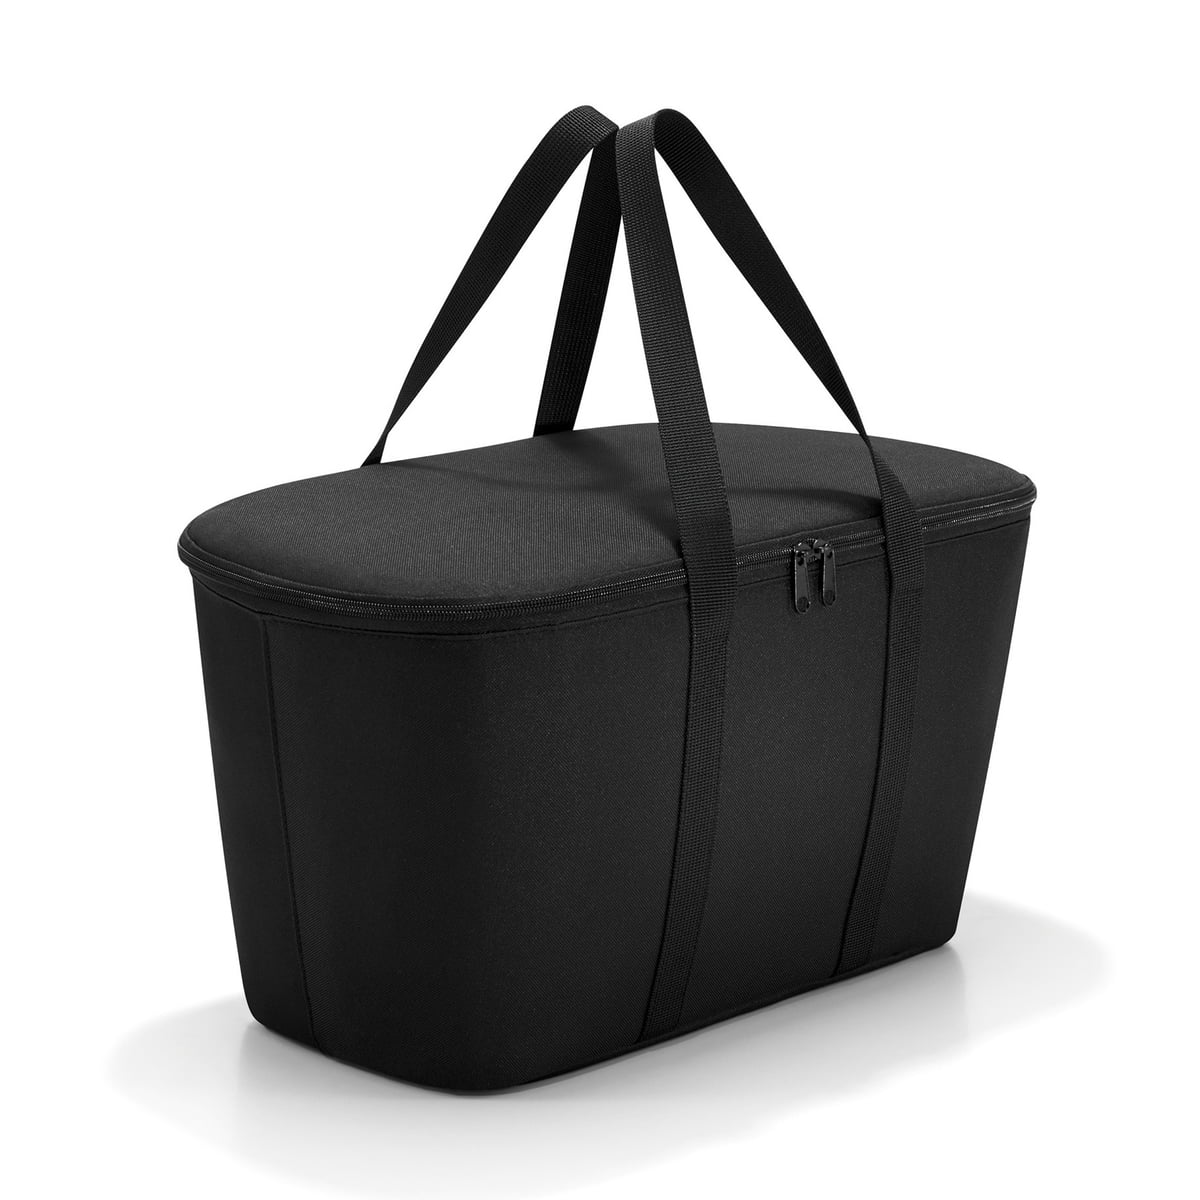 Collapsible 20-Liter Insulated Tote with Zipper Closure reisenthel Coolerbag Signature Black